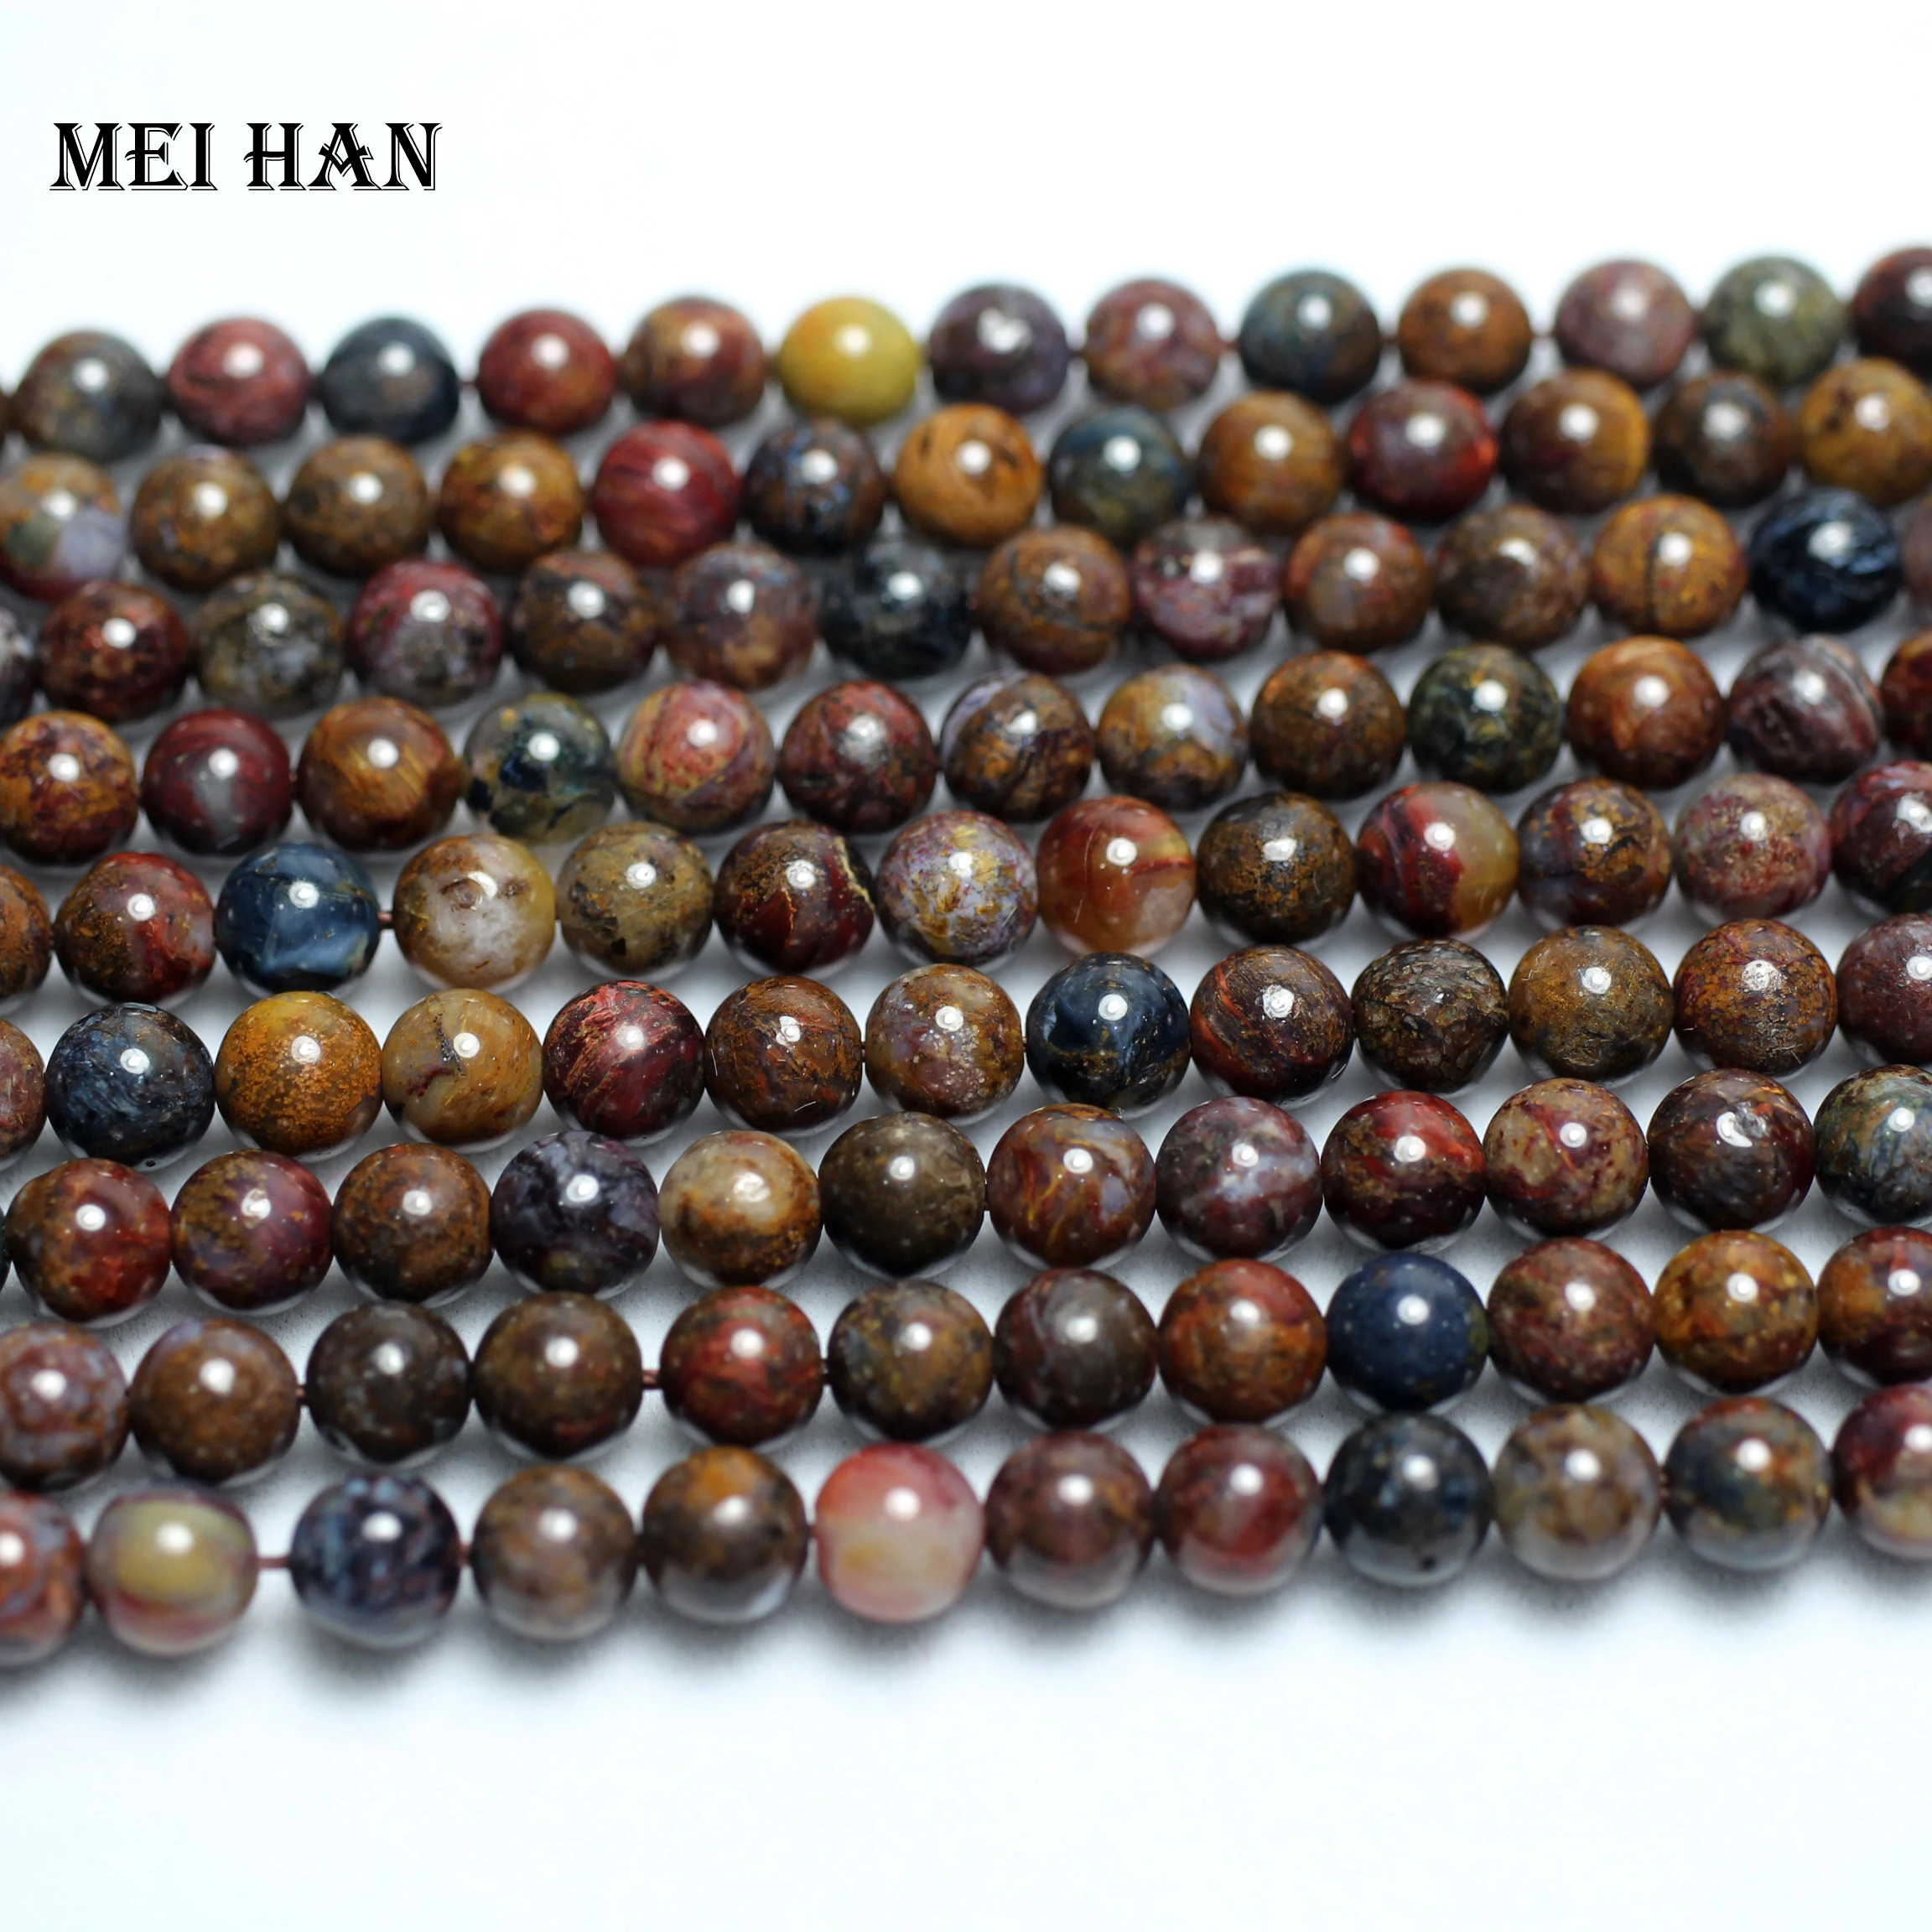 

Meihan Free shipping (2 strands/set) natural 6mm vintage Pietersite smooth round amazing beads stone for jewelry making design